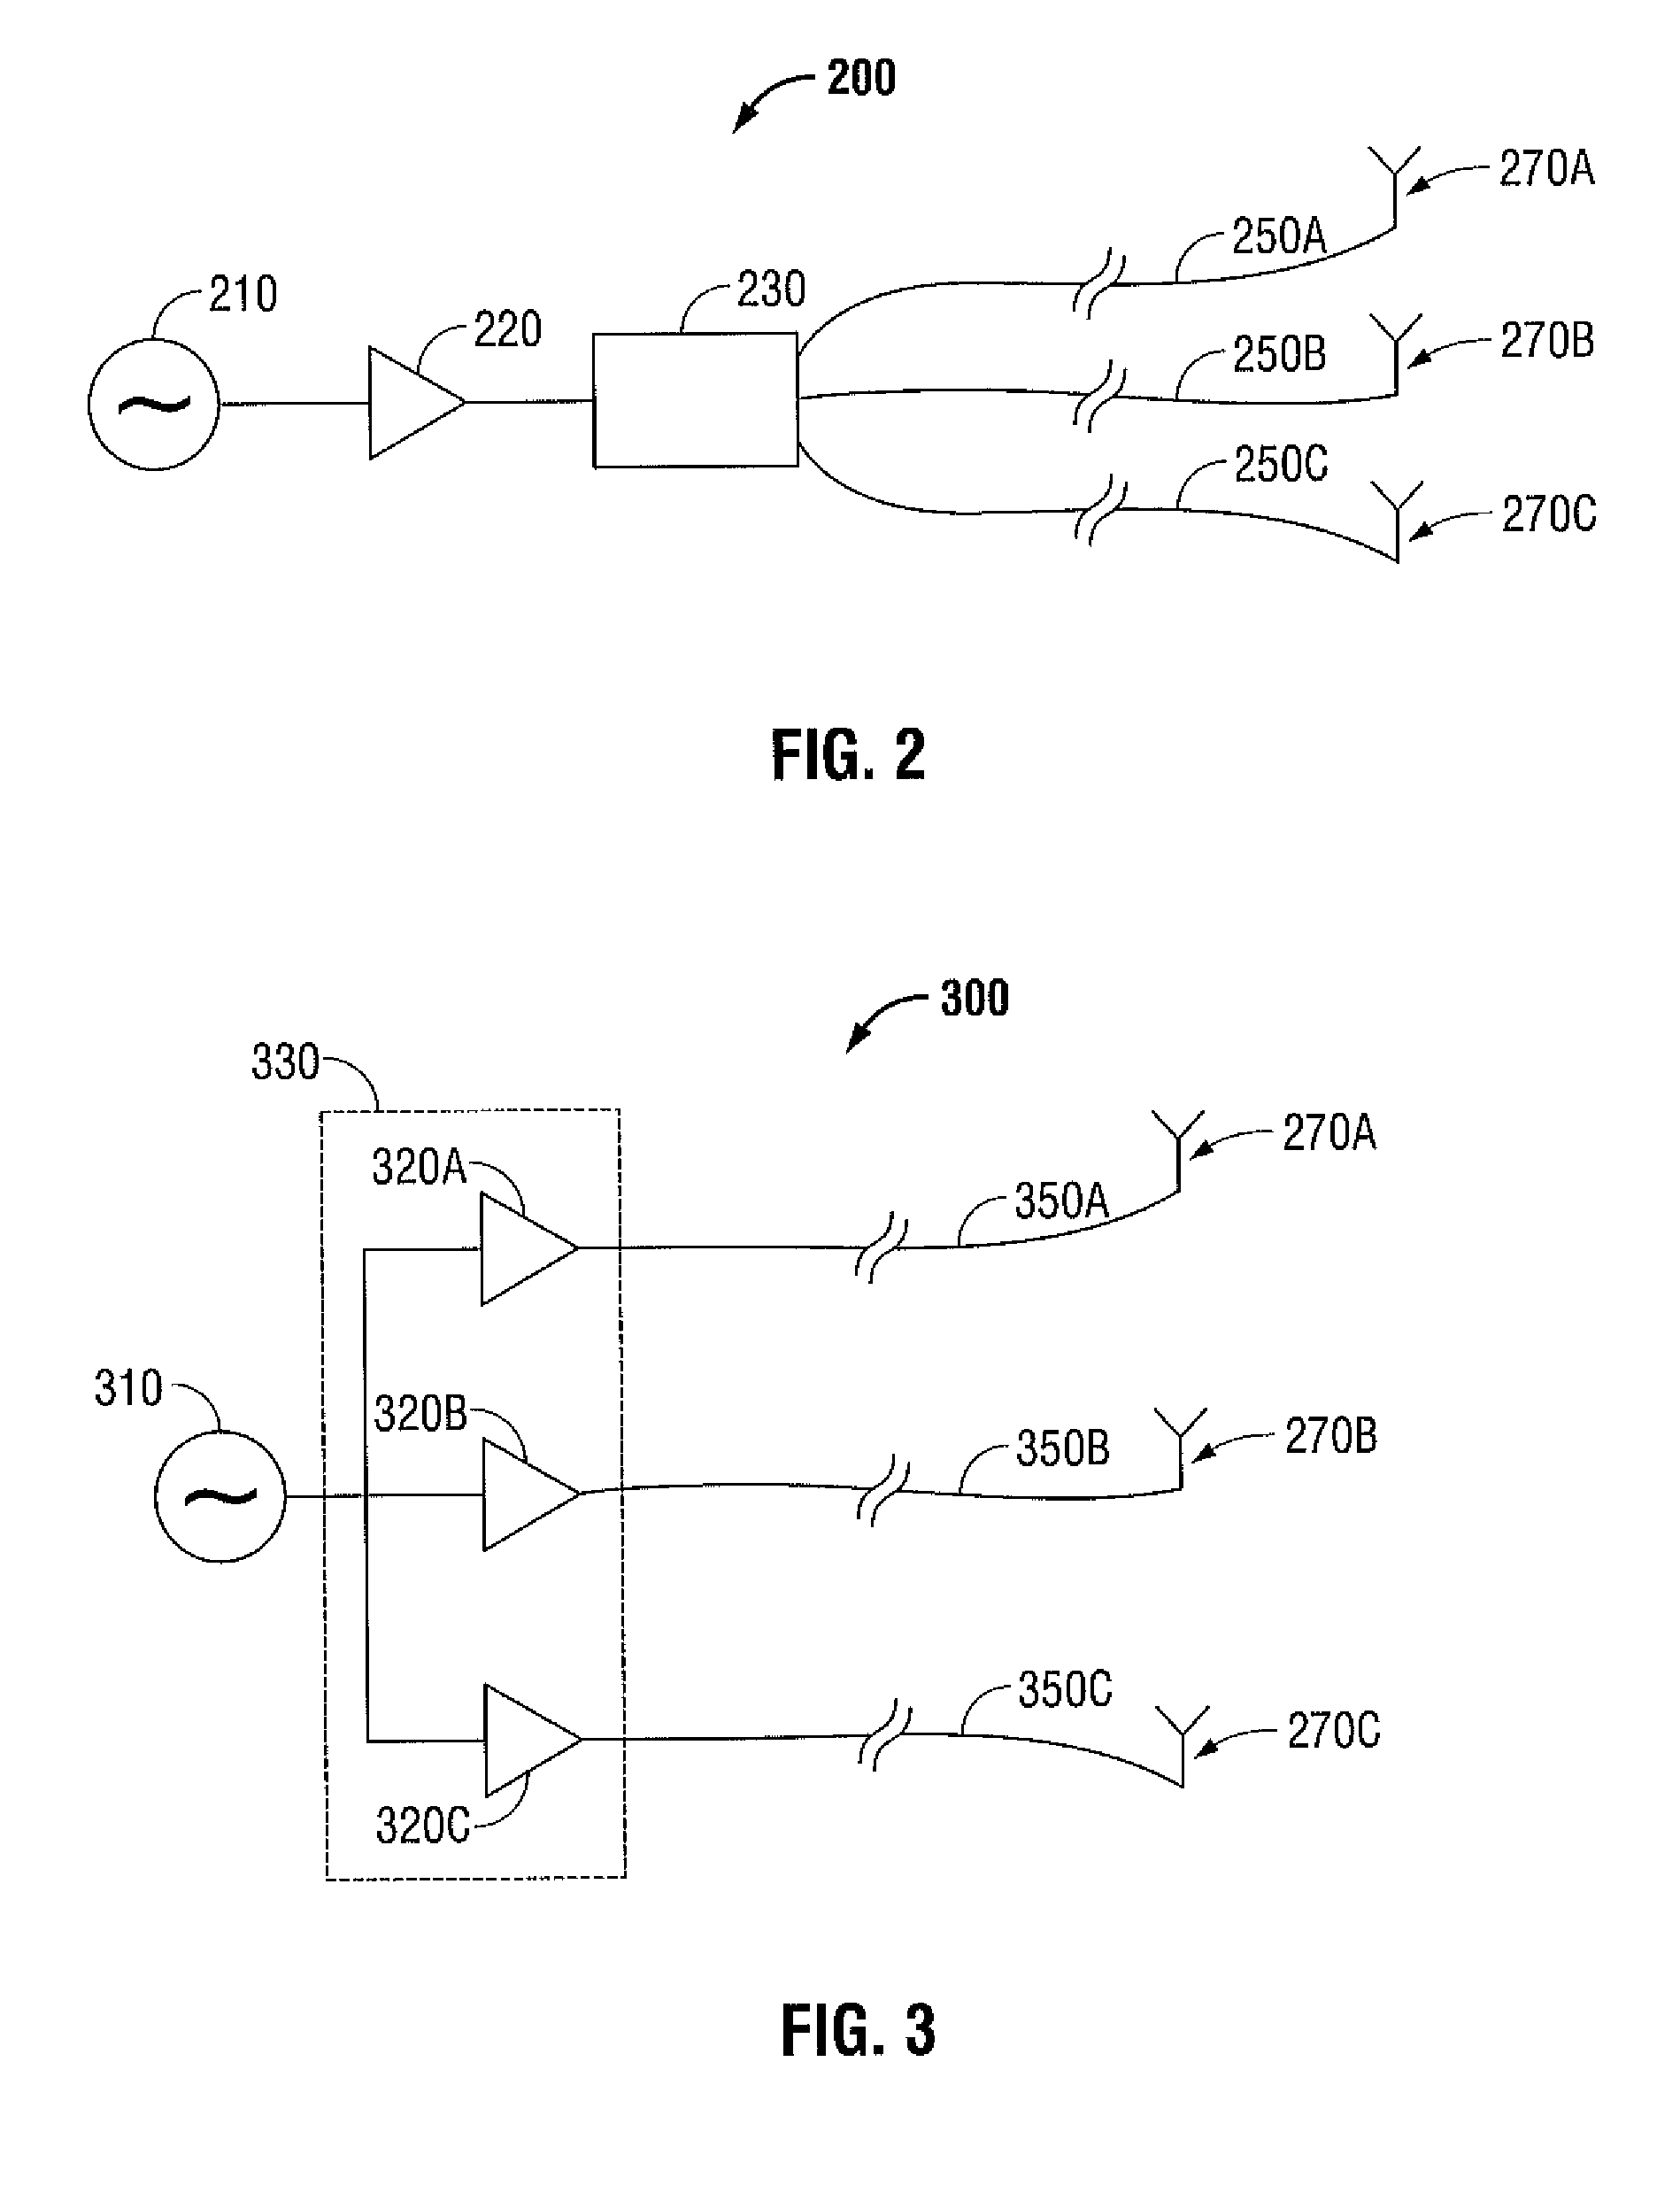 Tissue Ablation System With Phase-Controlled Channels